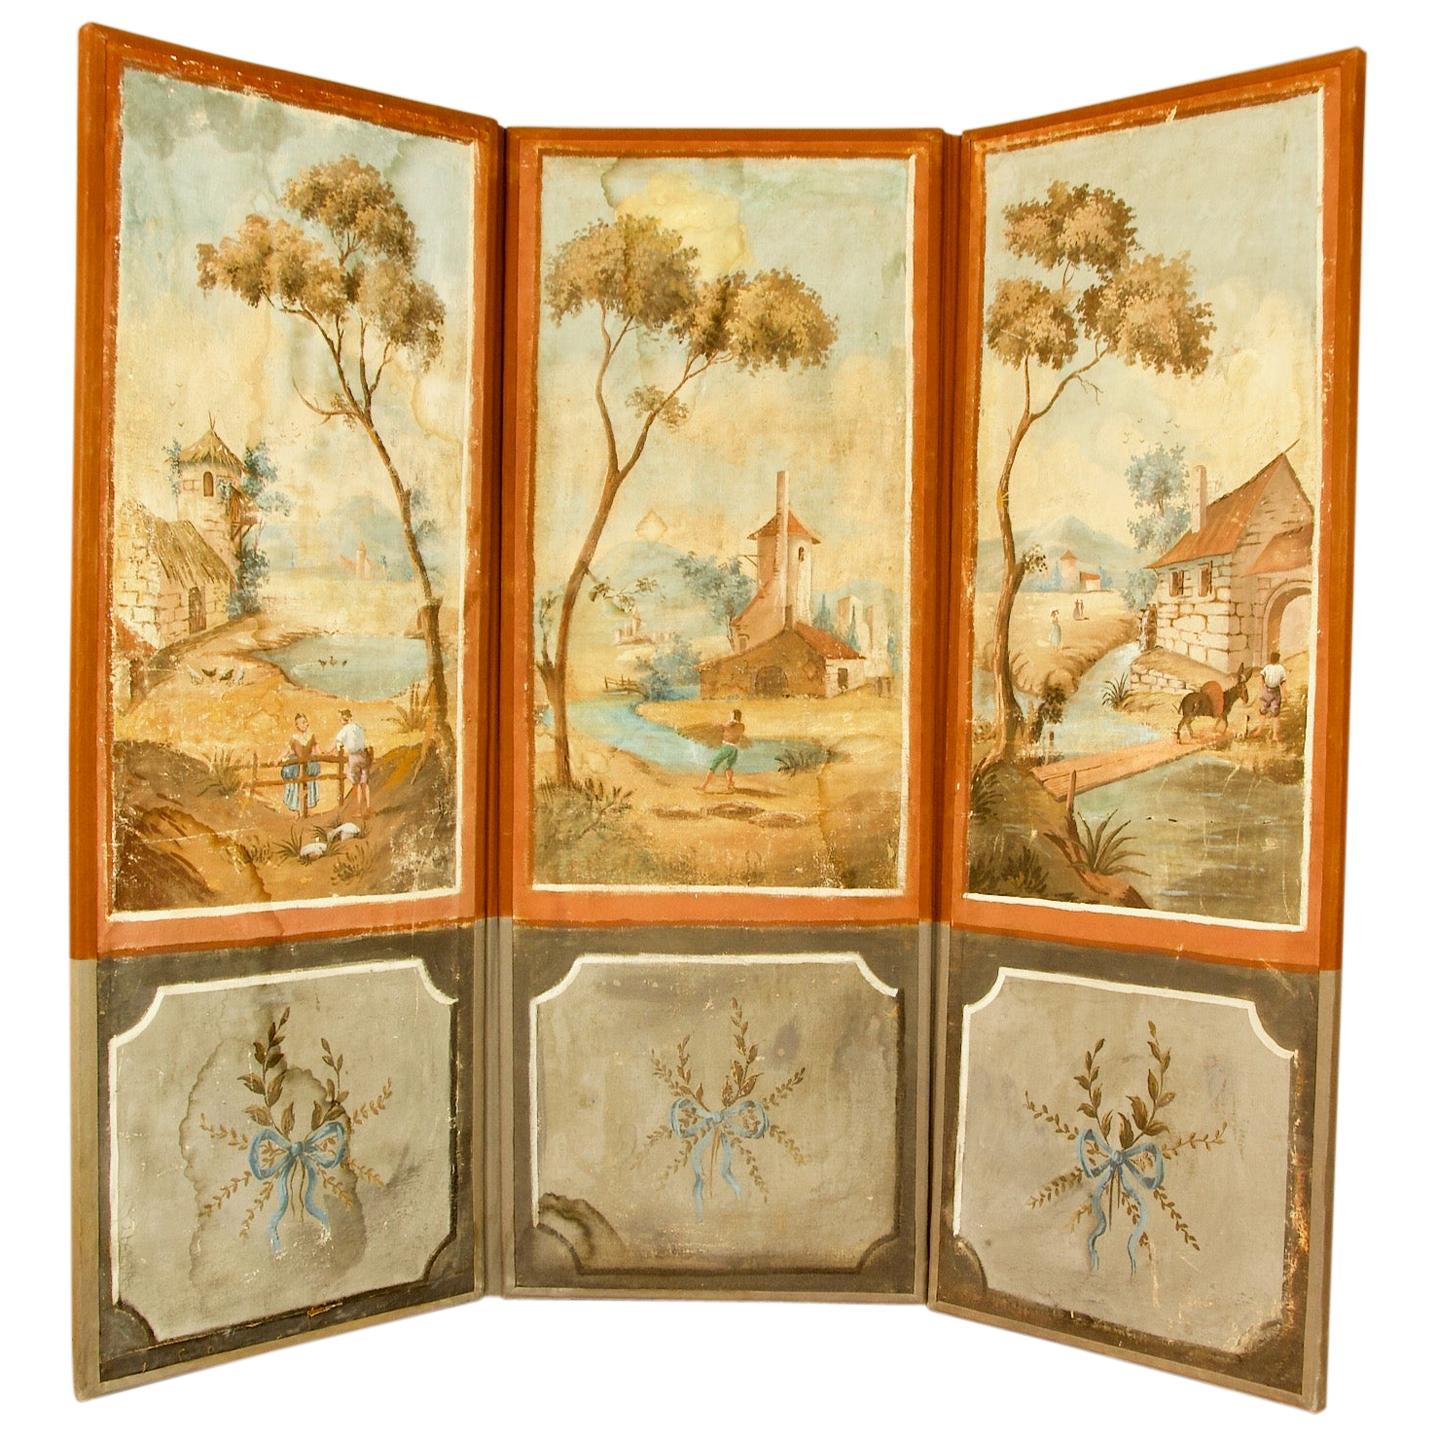 French 18th Century Southern Landscapes Three-Leaf Folding Screen or Paravent